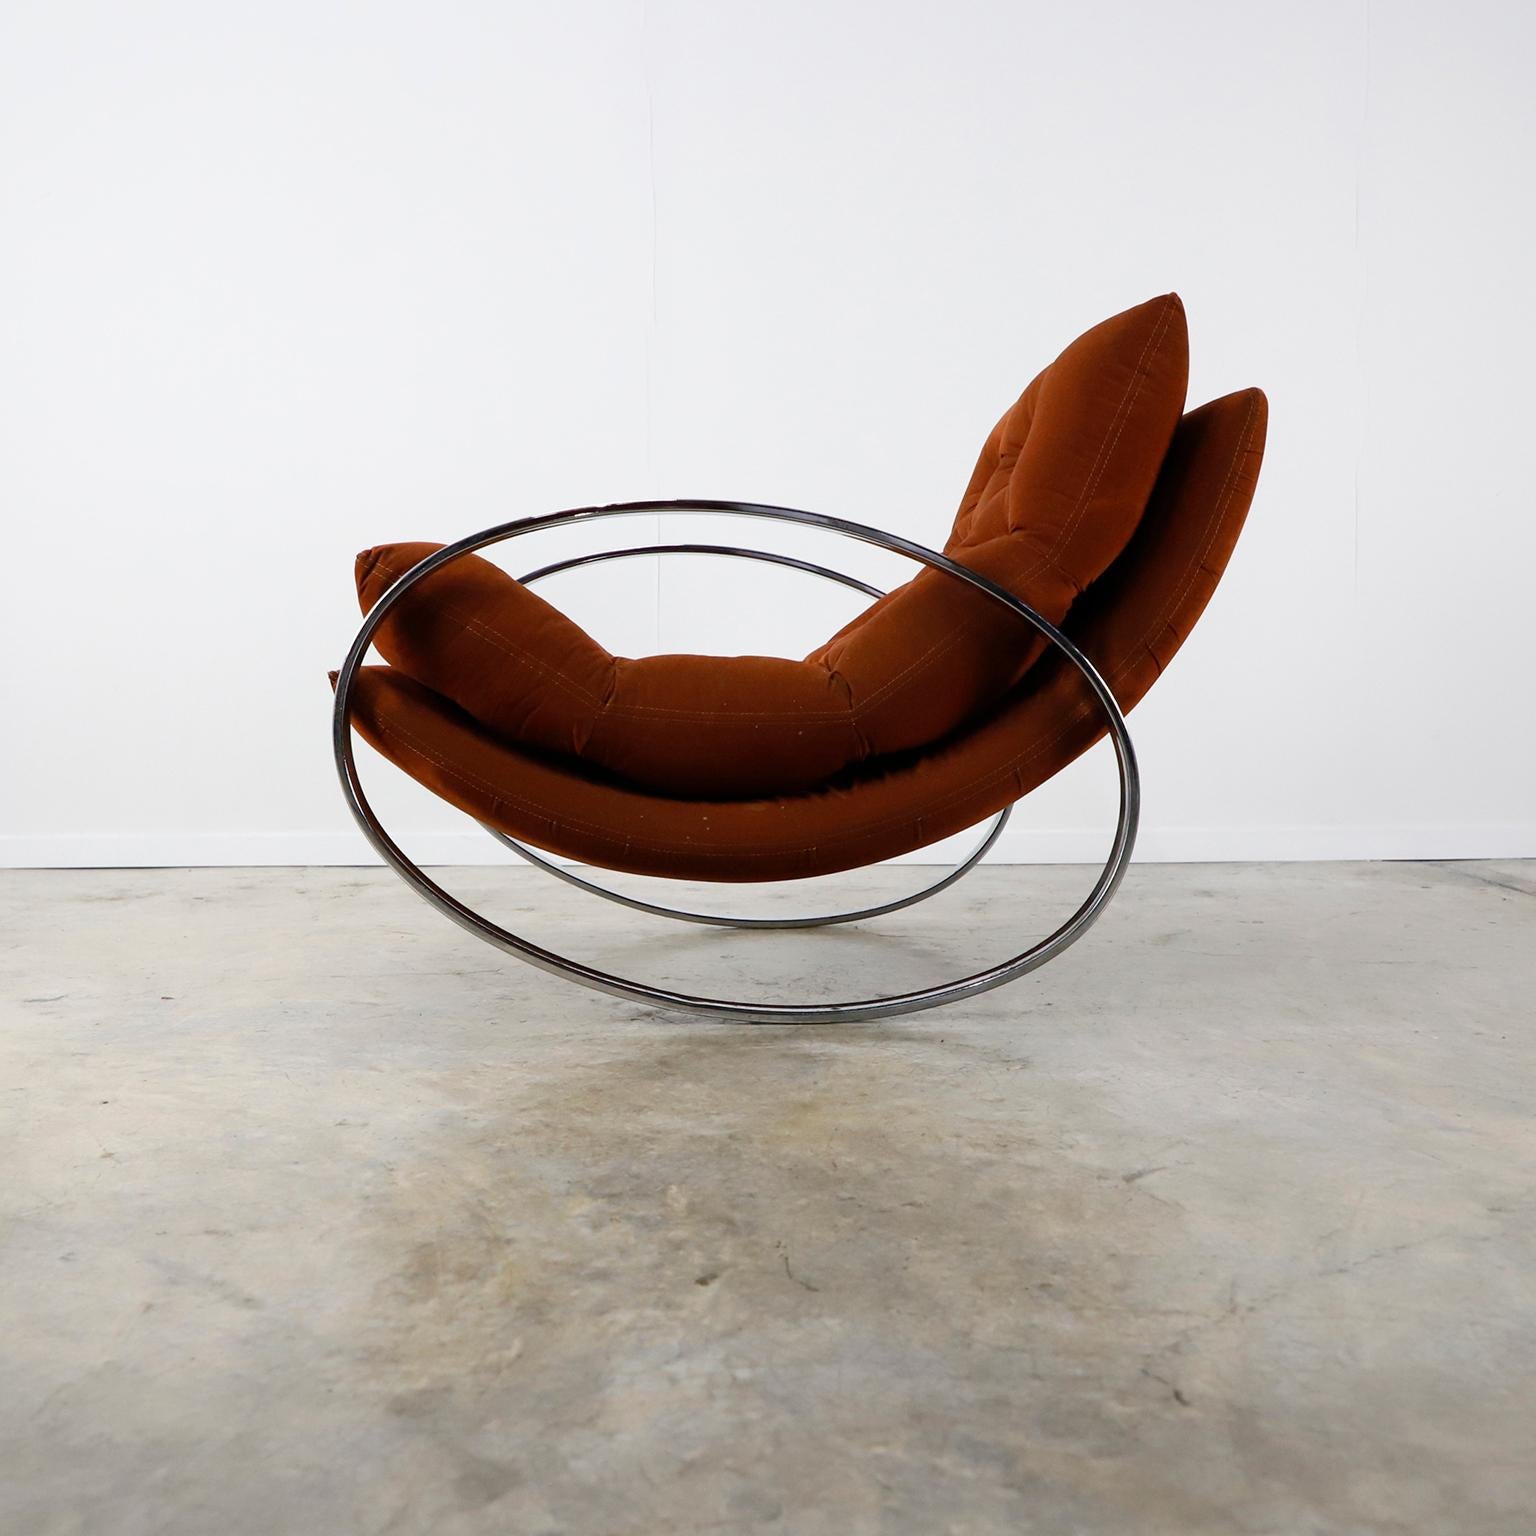 1970s Ellipse Tubular Chrome Rocking Chair In Good Condition For Sale In Mexico City, CDMX